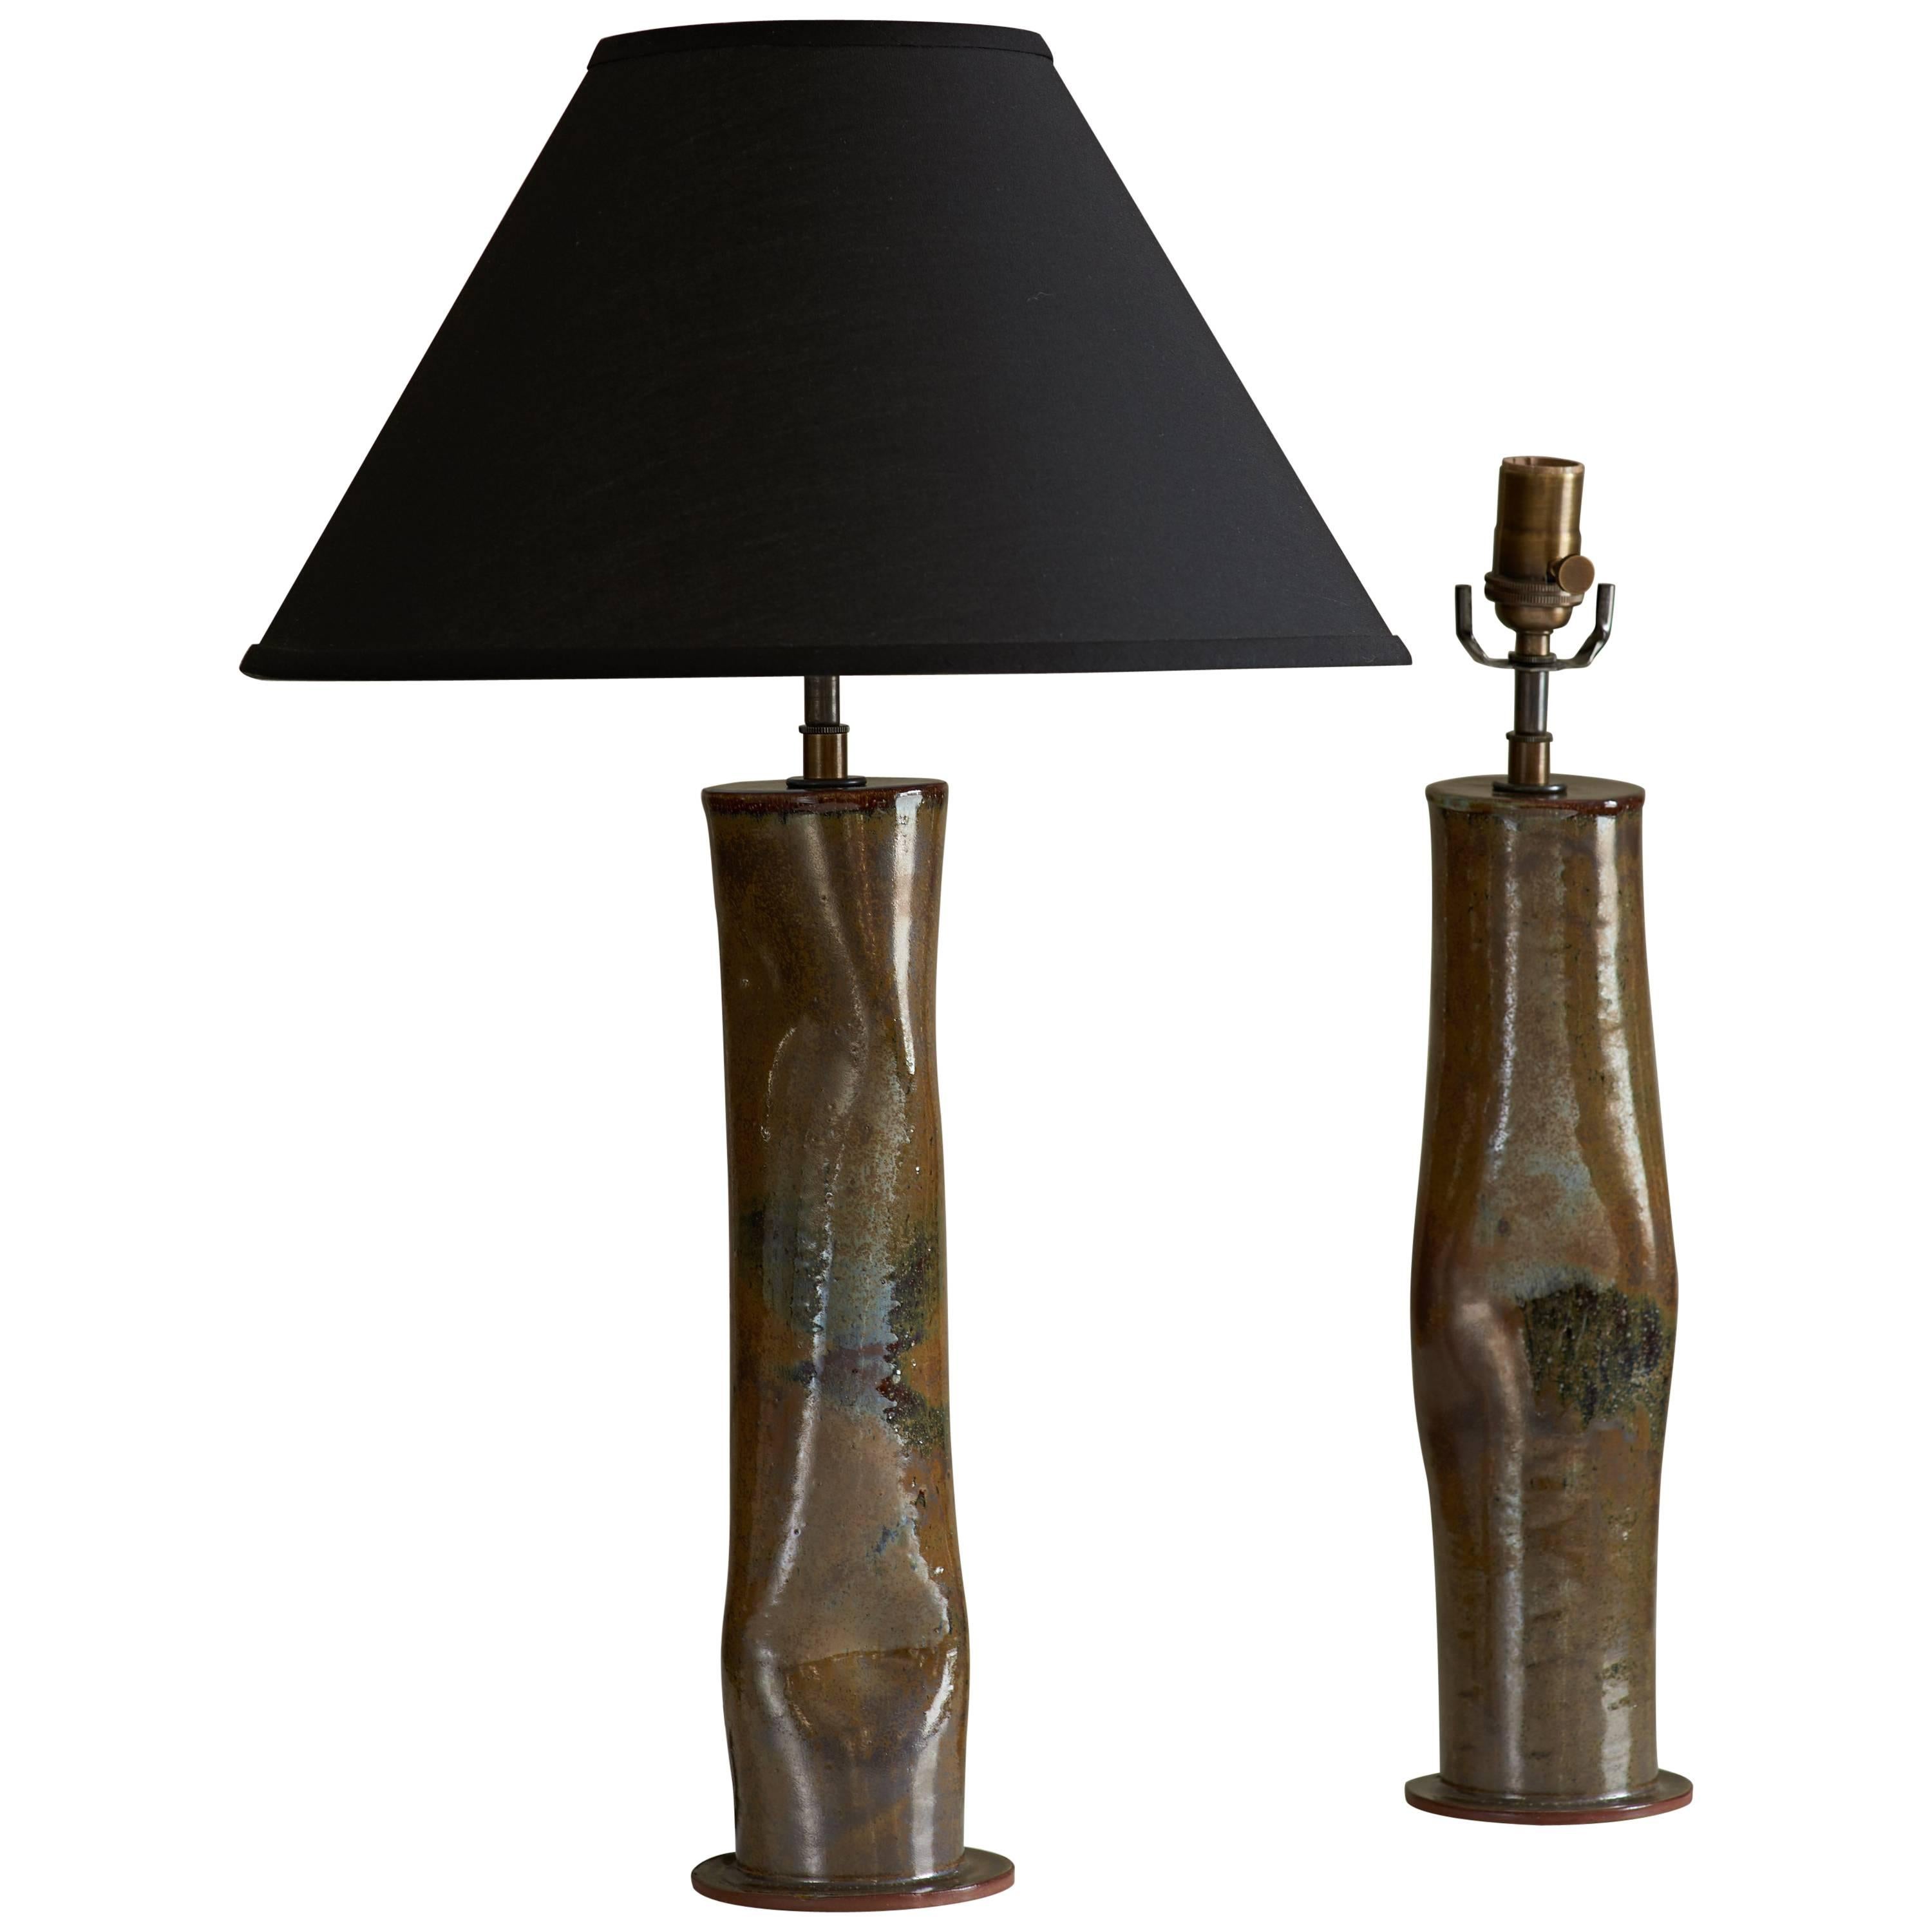 Ceramic Sculptural Table Lamp by Dumais Made